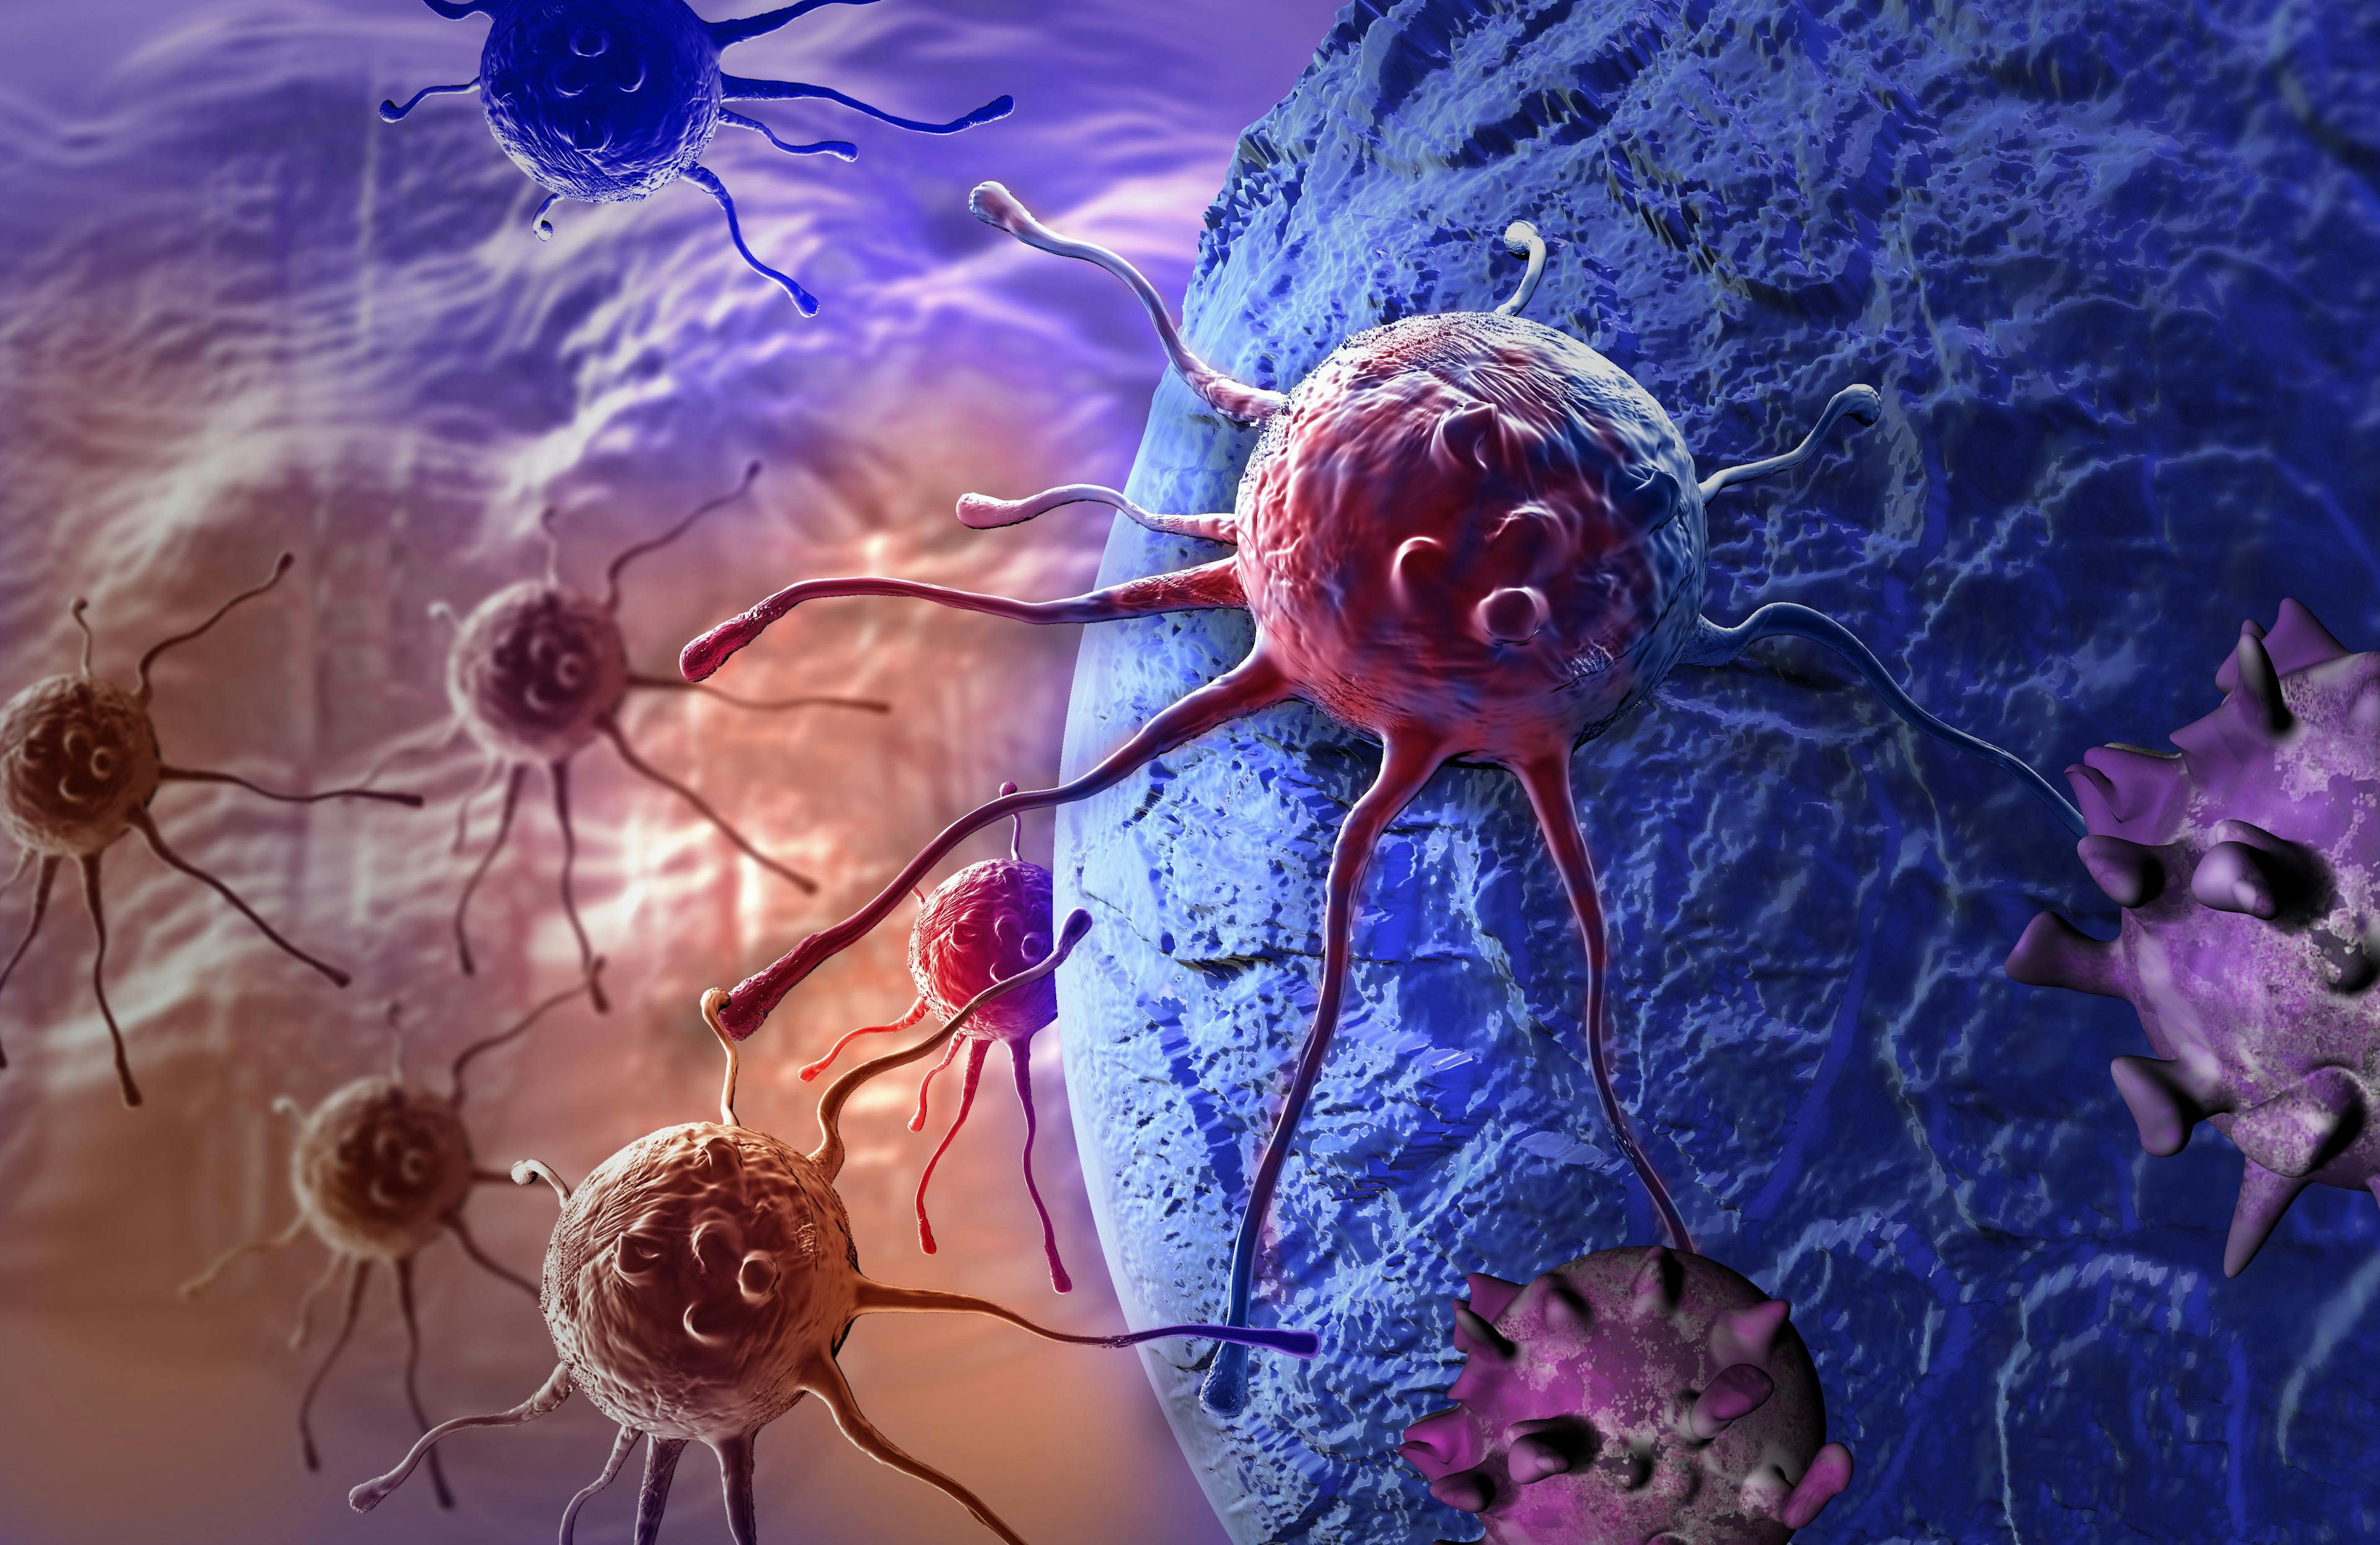 CAR-NK Cells Show Potential in Solid Tumor Immunotherapy